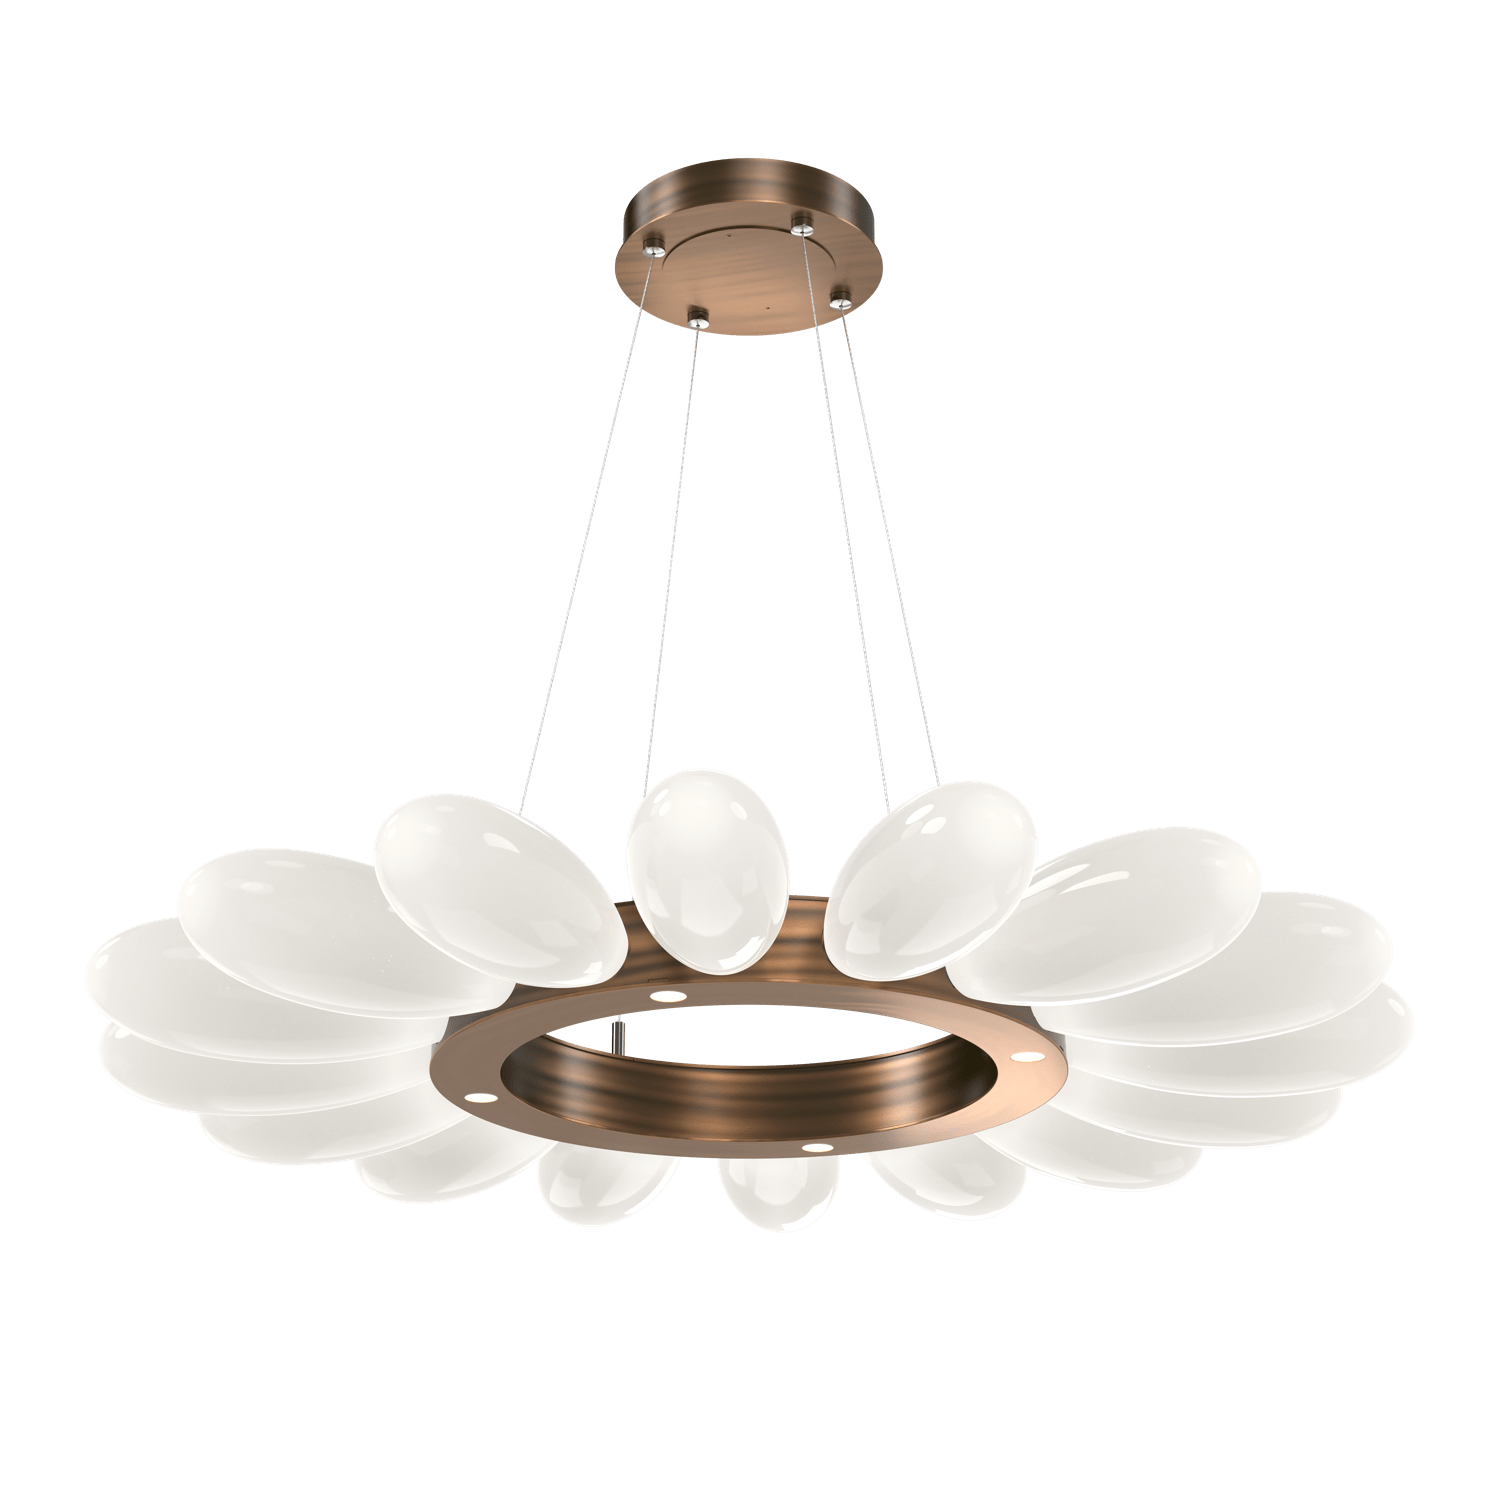 CHB0071-39-RB-WL-LL-Hammerton-Studio-Fiori-39-inch-radial-ring-chandelier-with-oil-rubbed-bronze-finish-and-opal-white-glass-shades-and-LED-lamping